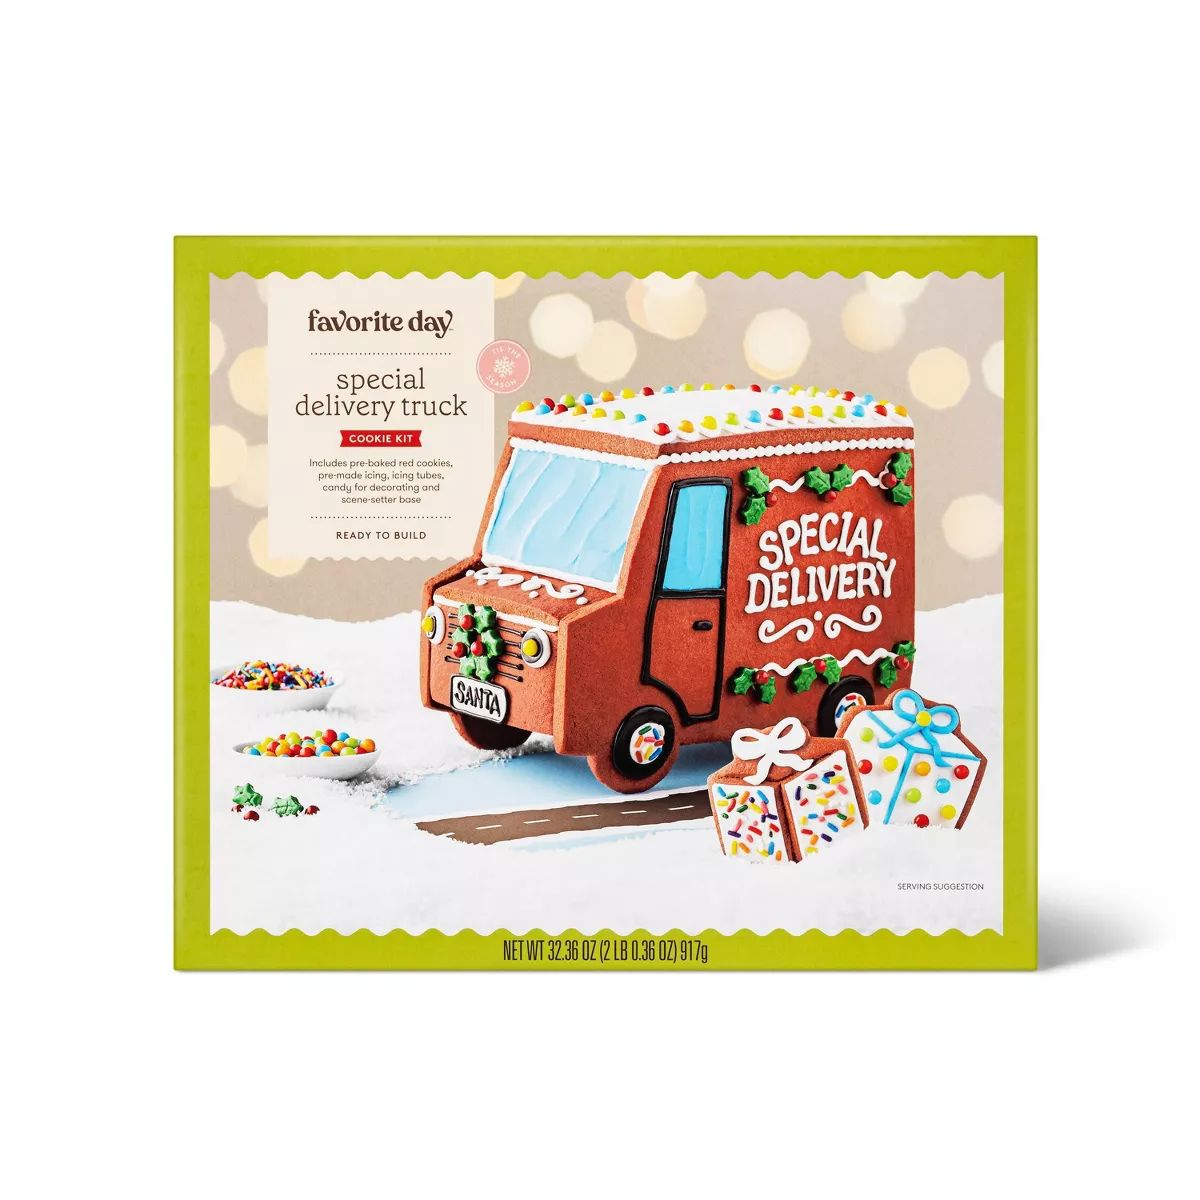 Holiday Special Delivery Truck Gingerbread Kit - 35oz - Favorite Day™ | Target